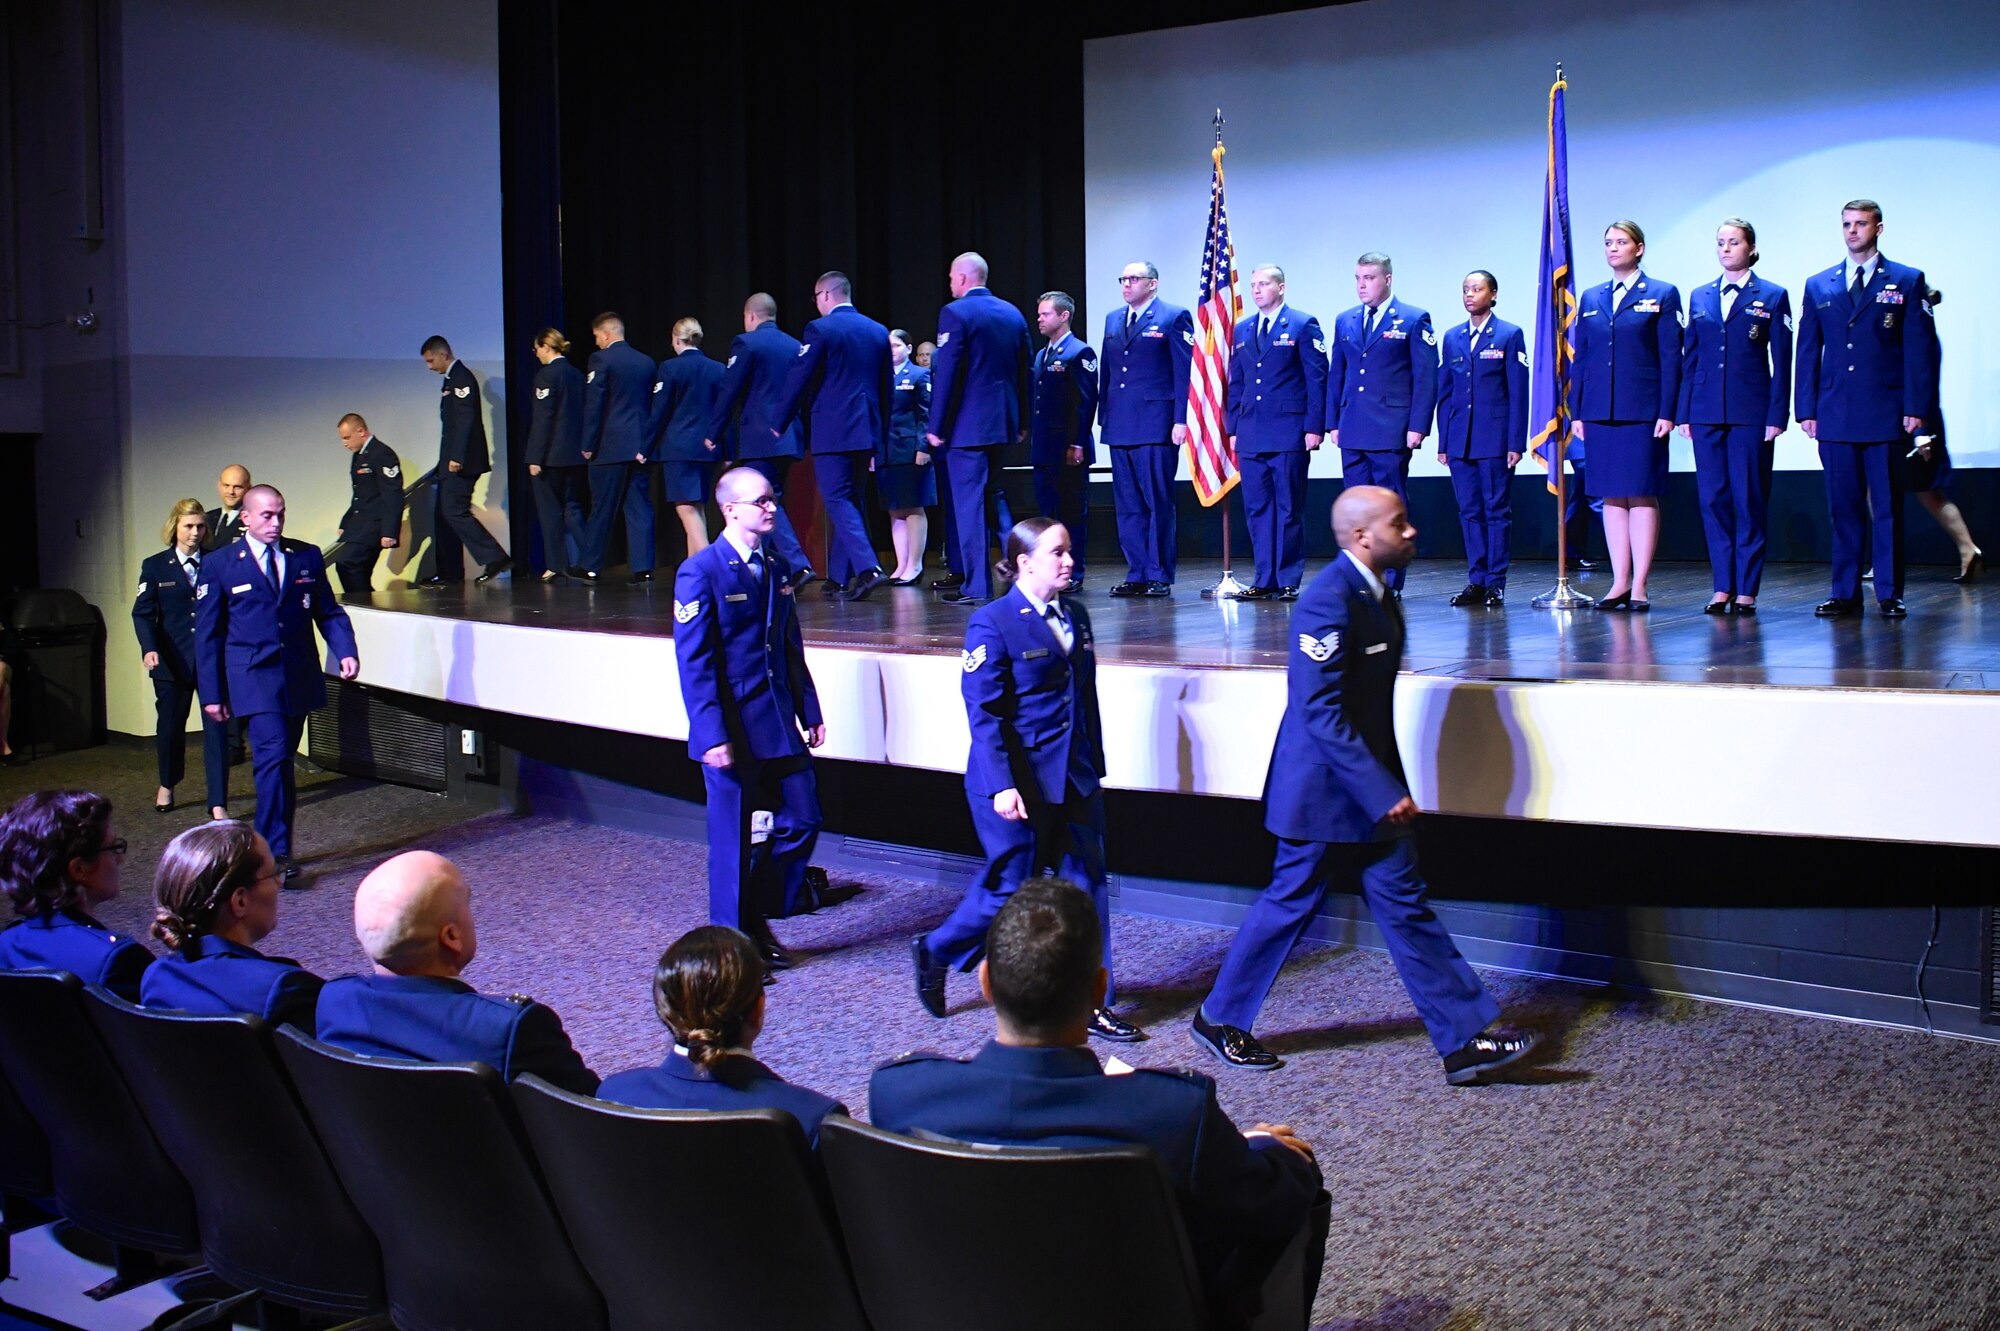 Members of the 932nd Airlift Wing walk past the American flag and Air Force flag at the start of the unit's Non-Commissioned and Senior Non-Commissioned Officer Induction Ceremony held September 9, 2018, at Scott Air Force Base, Illinois.  Friends, family, and co-workers cheered as the new inductees walked up to collect their promotion certificates from the commander of the wing, Col. Raymond Smith, and the Command Chief, Chief Master Sgt. Barbara Gilmore.  The event recognized the leadership and skills of those members achieving higher ranks and leadership expectation status recently.  (U.S. Air Force photo by Lt. Col. Stan Paregien)